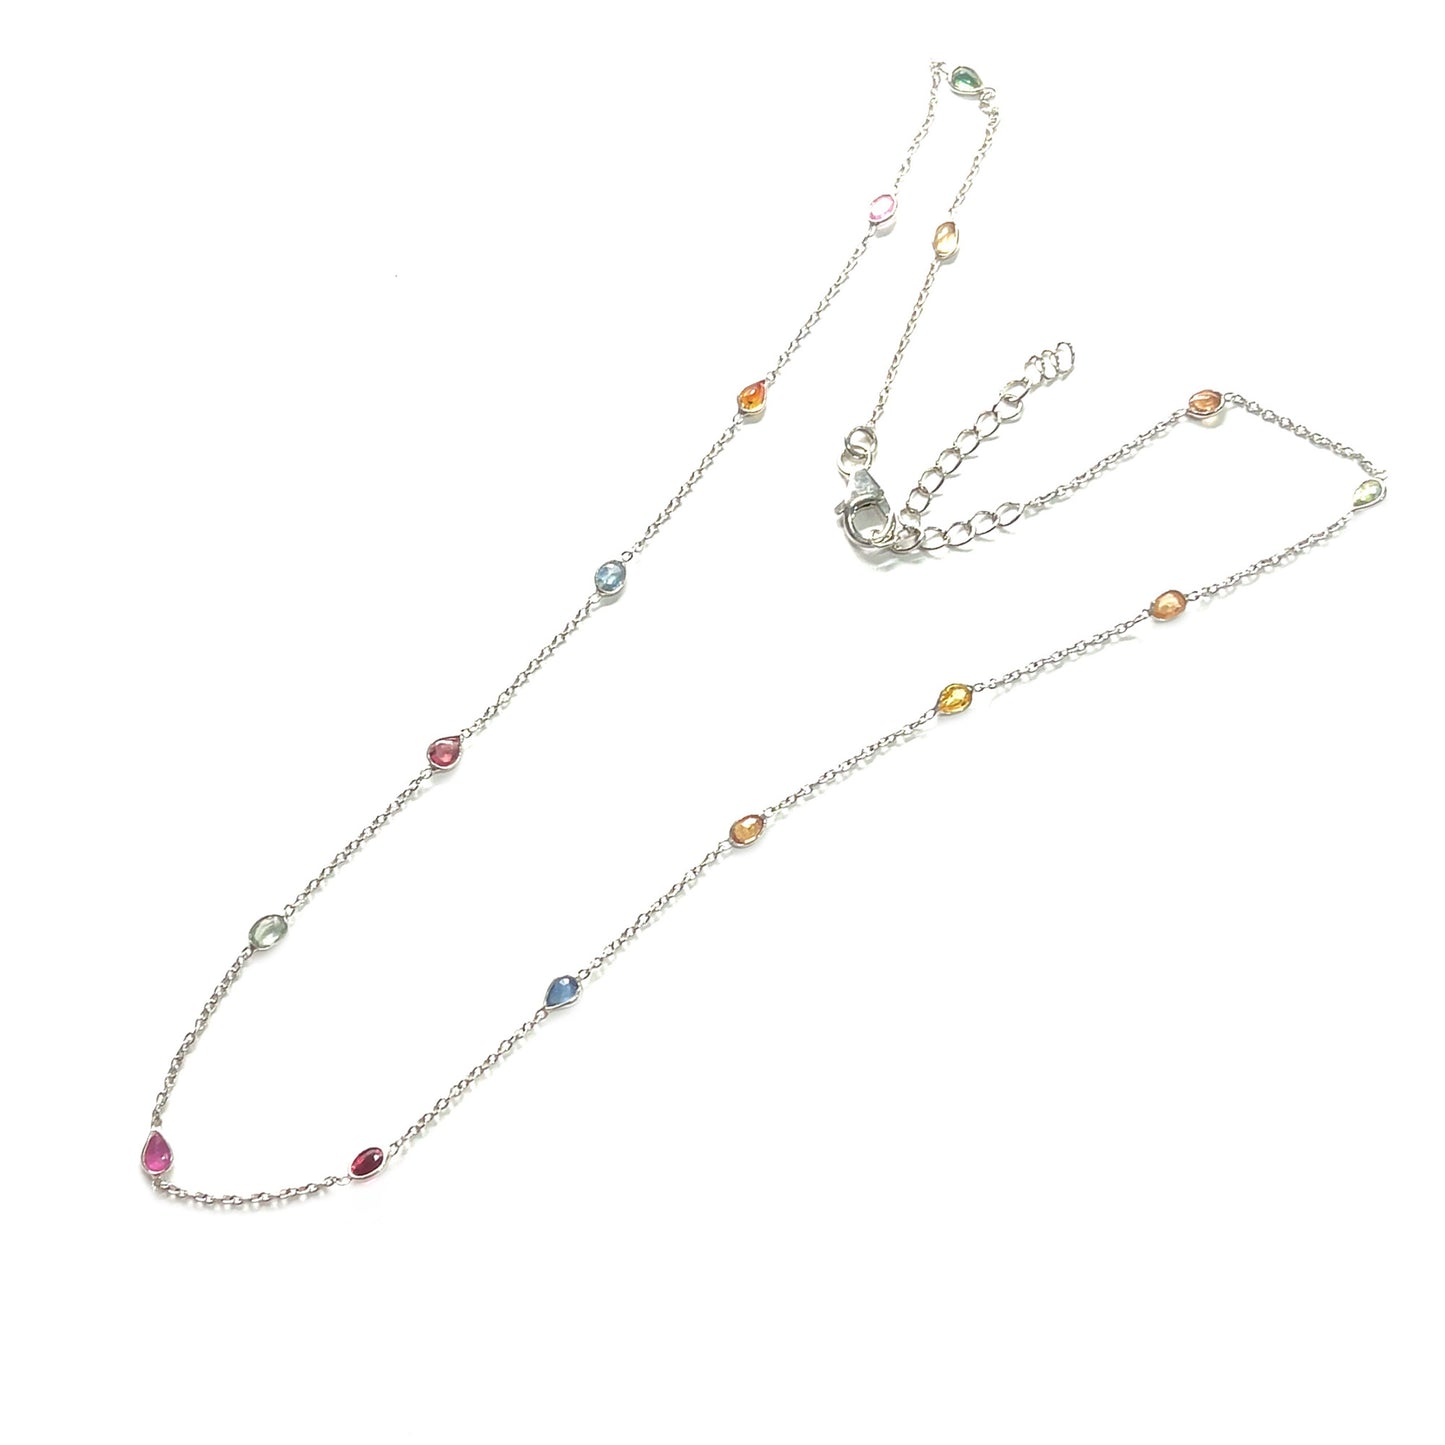 925 Sterling Silver Multi Sapphire Station Necklace